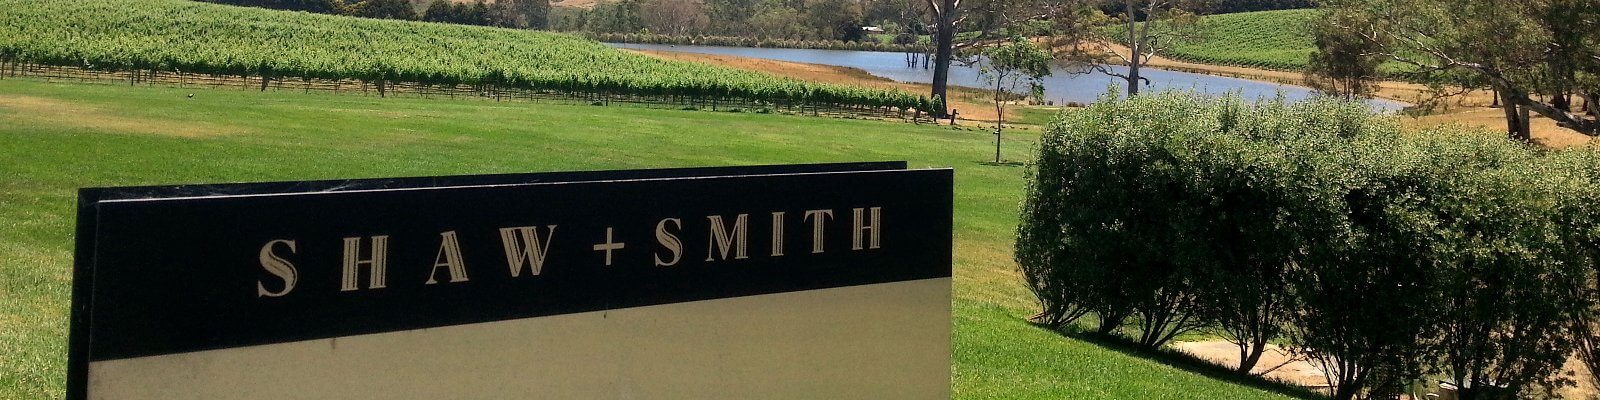 Our collection of Smith + Shaw - Find this at Onshore Cellars your yacht wine supplier